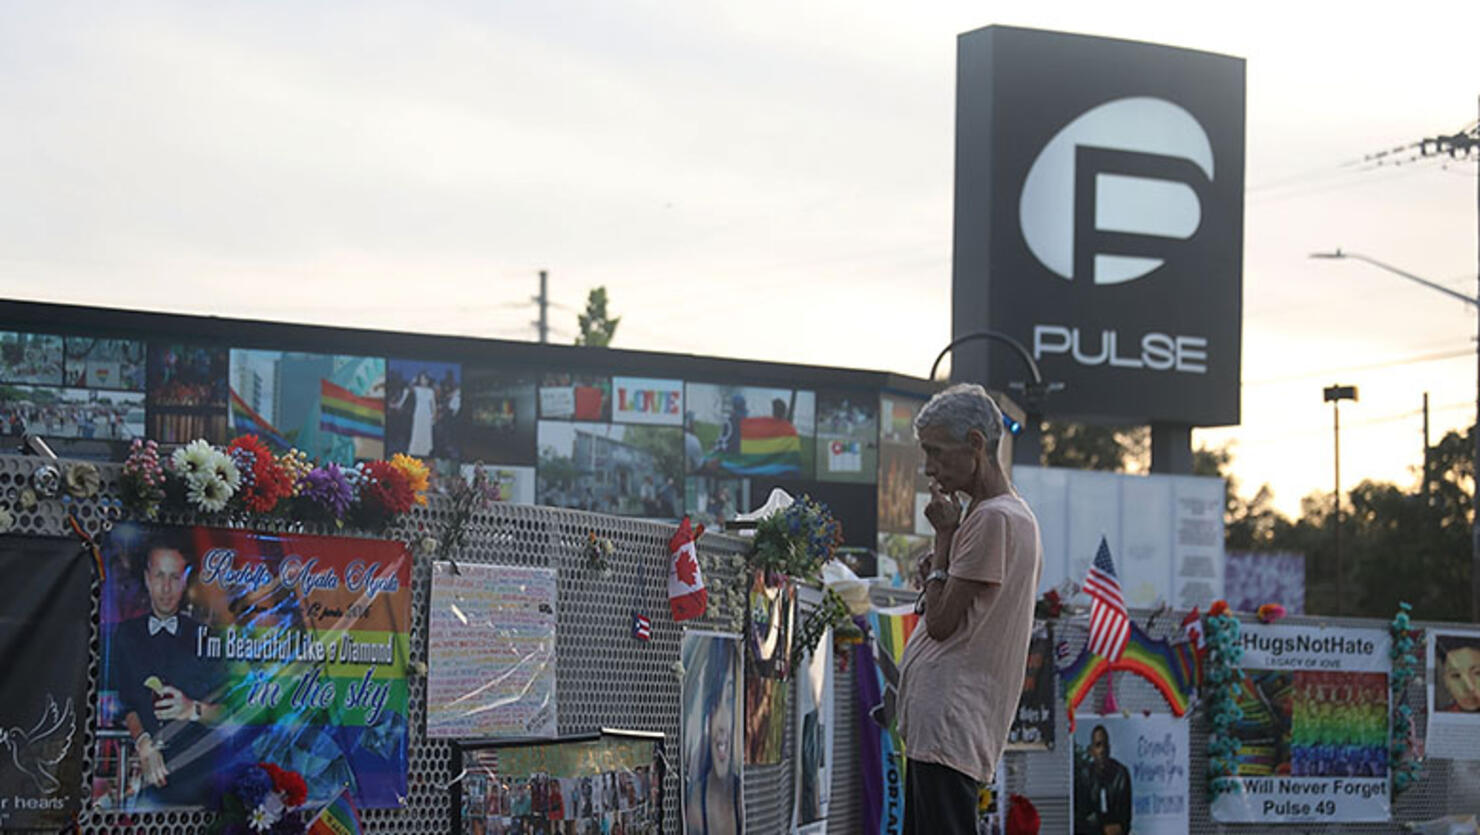 A visitor takes in the scene at the memorial to the 49 shooting victims setup at the Pulse nightclub where the shootings took place two years ago on June 12, 2018 in Orlando, Florida